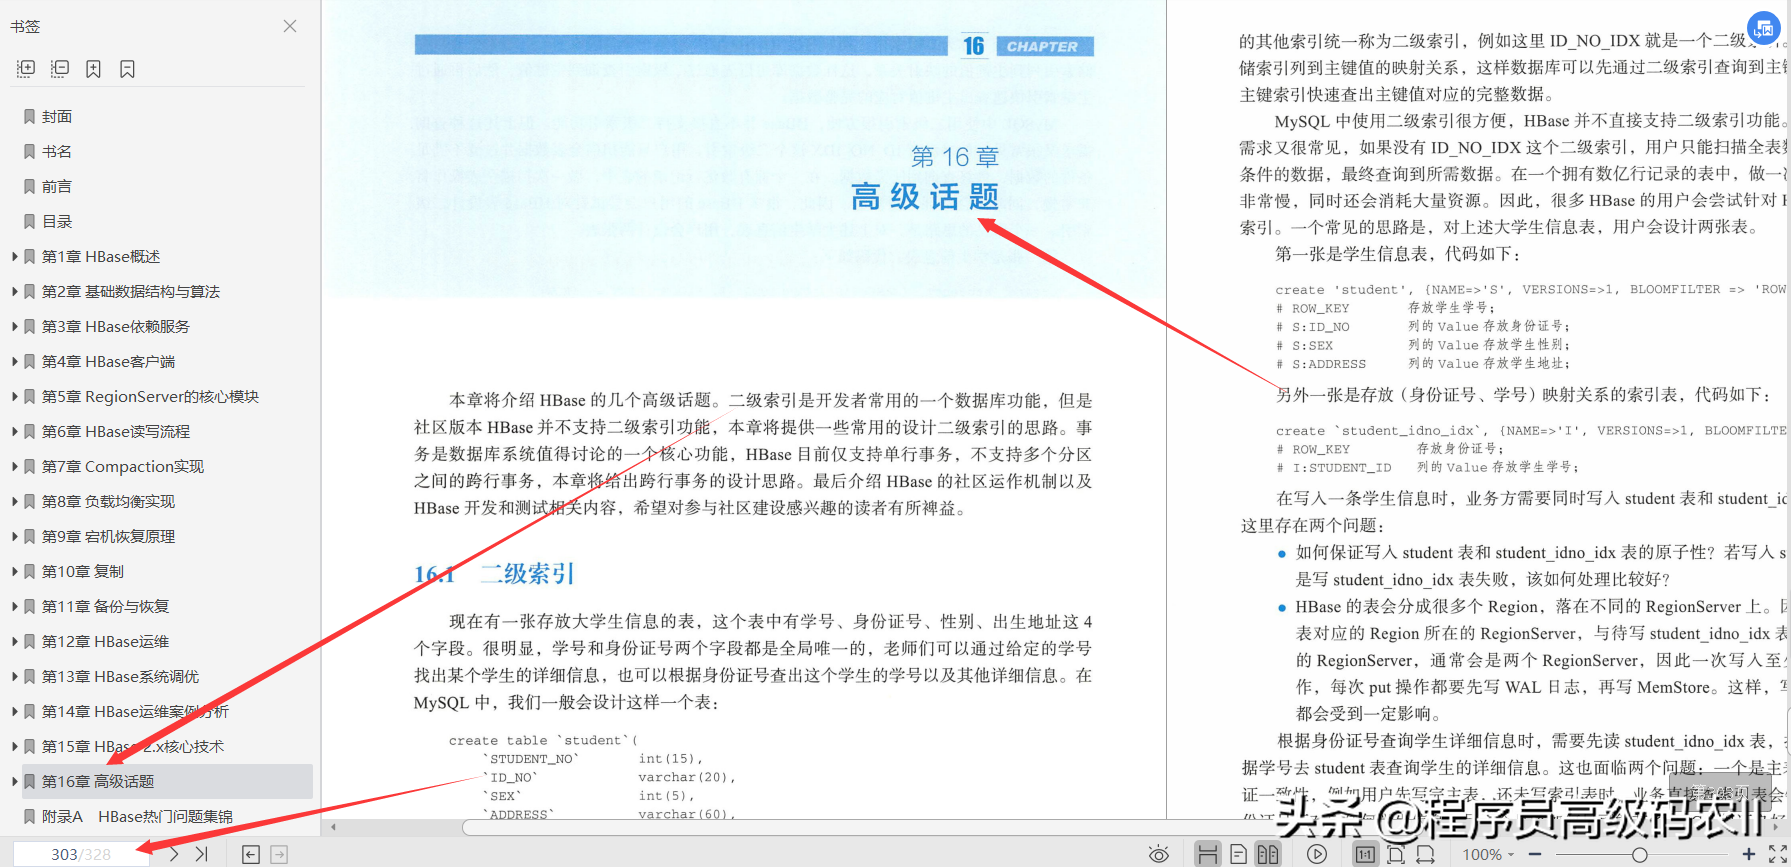 HBASE principle and practice PDF jointly compiled by two senior engineers of Xiaomi and Netease